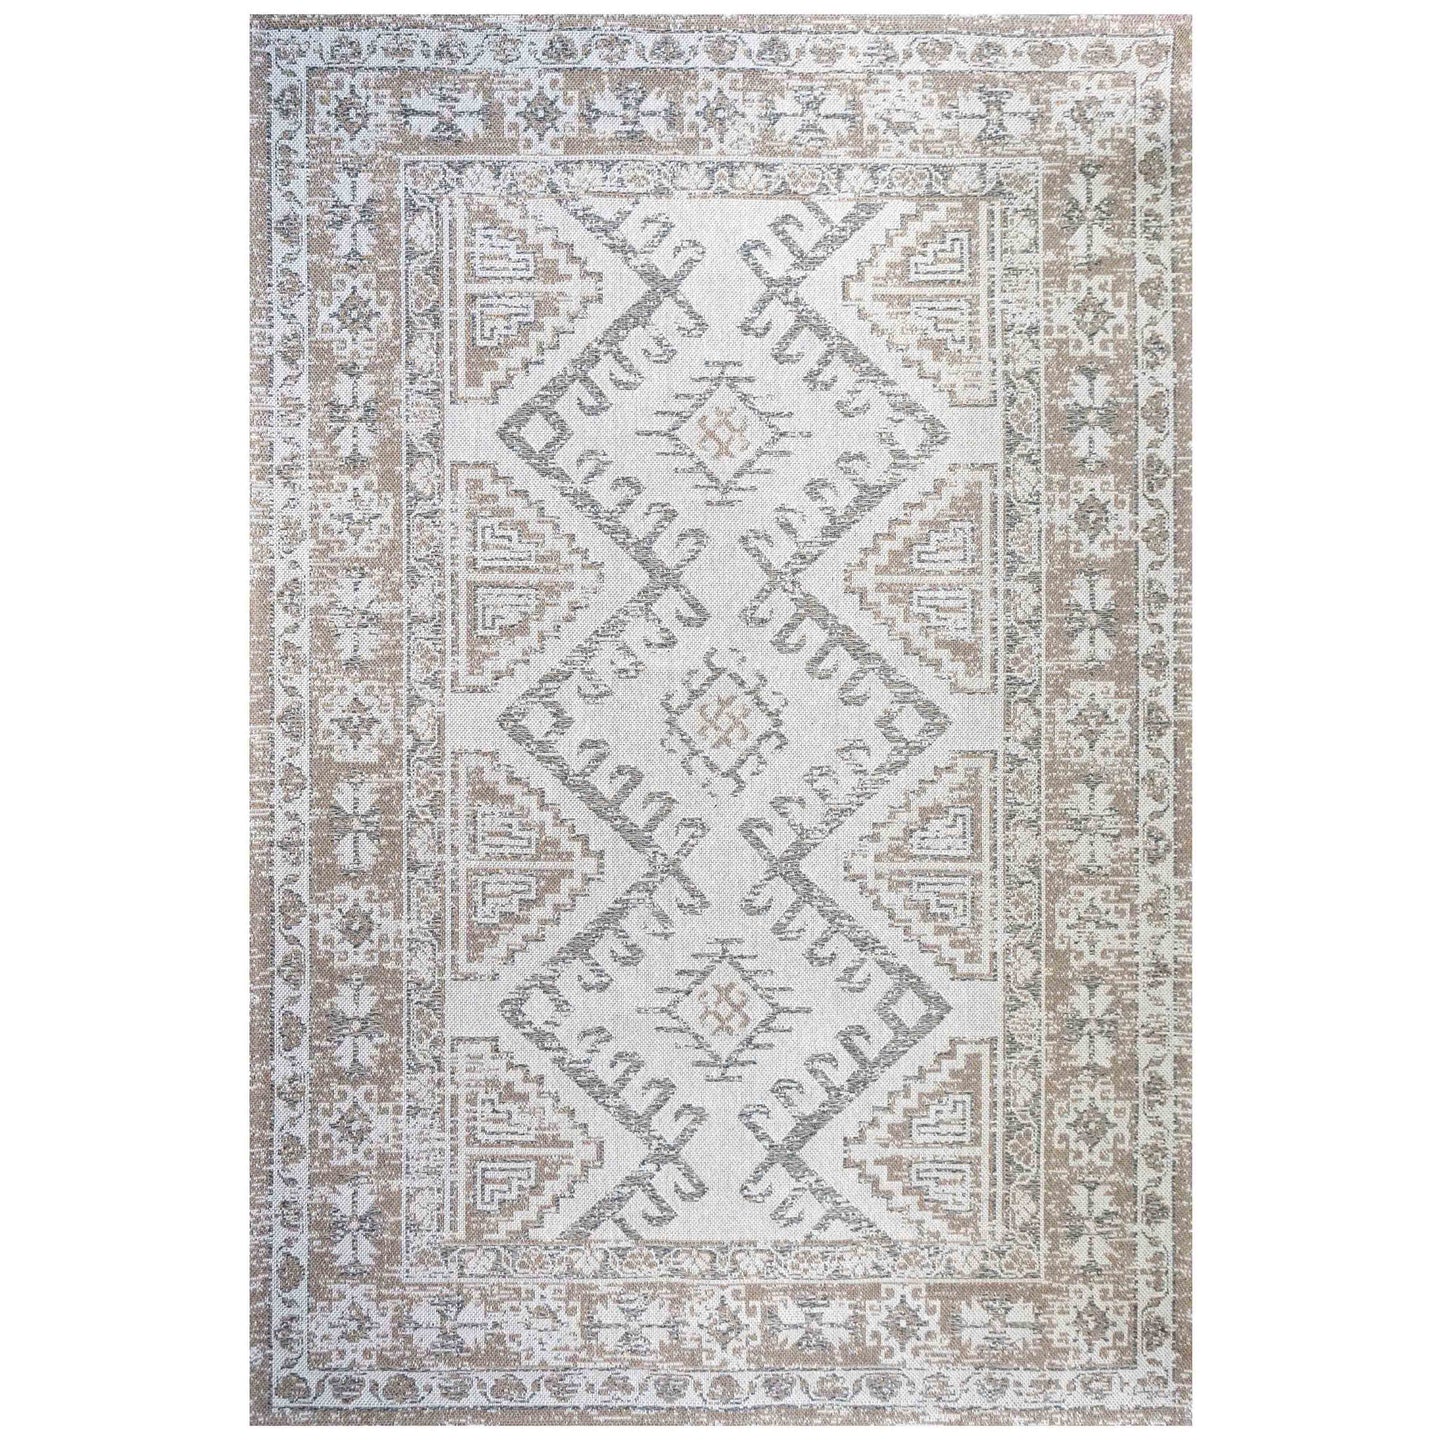 Vintage Faded Beige Woven Recycled Cotton Rug